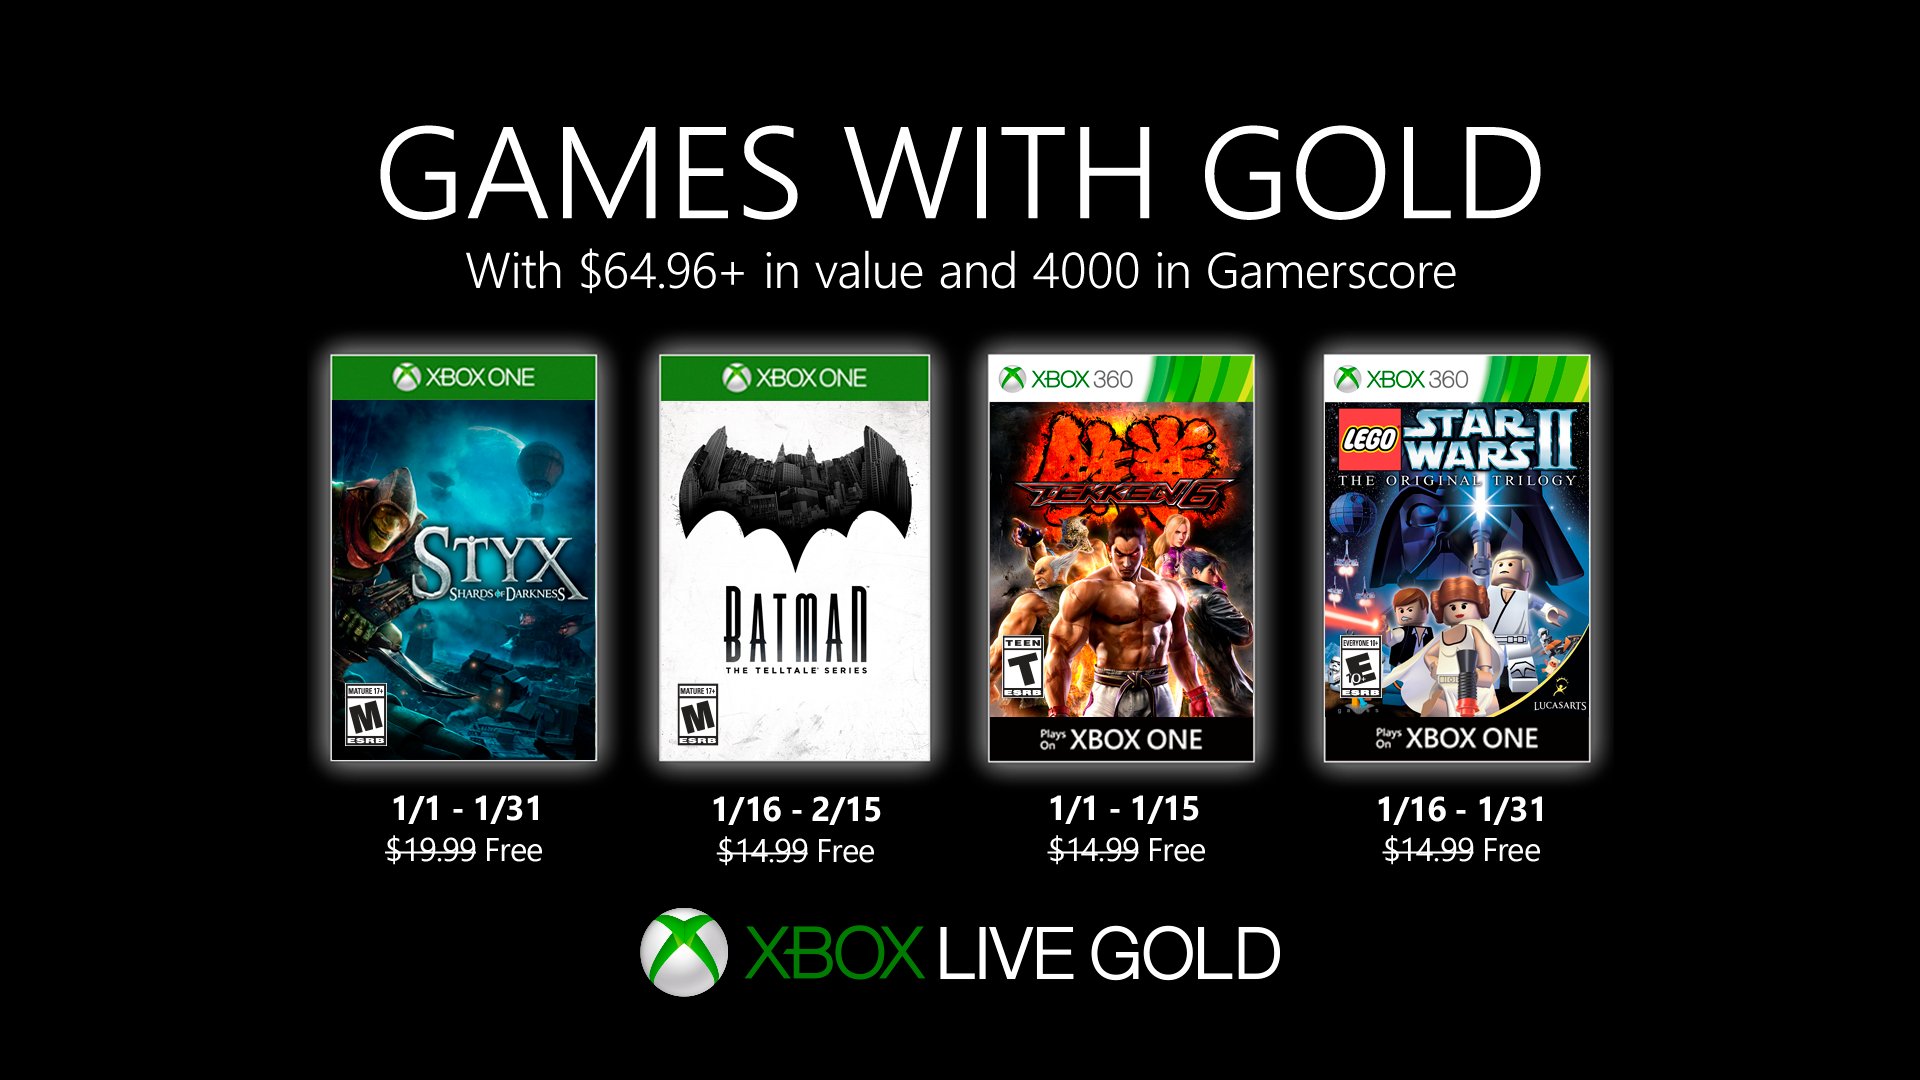 Xbox Games with Gold for January includes a Batman and Star Wars